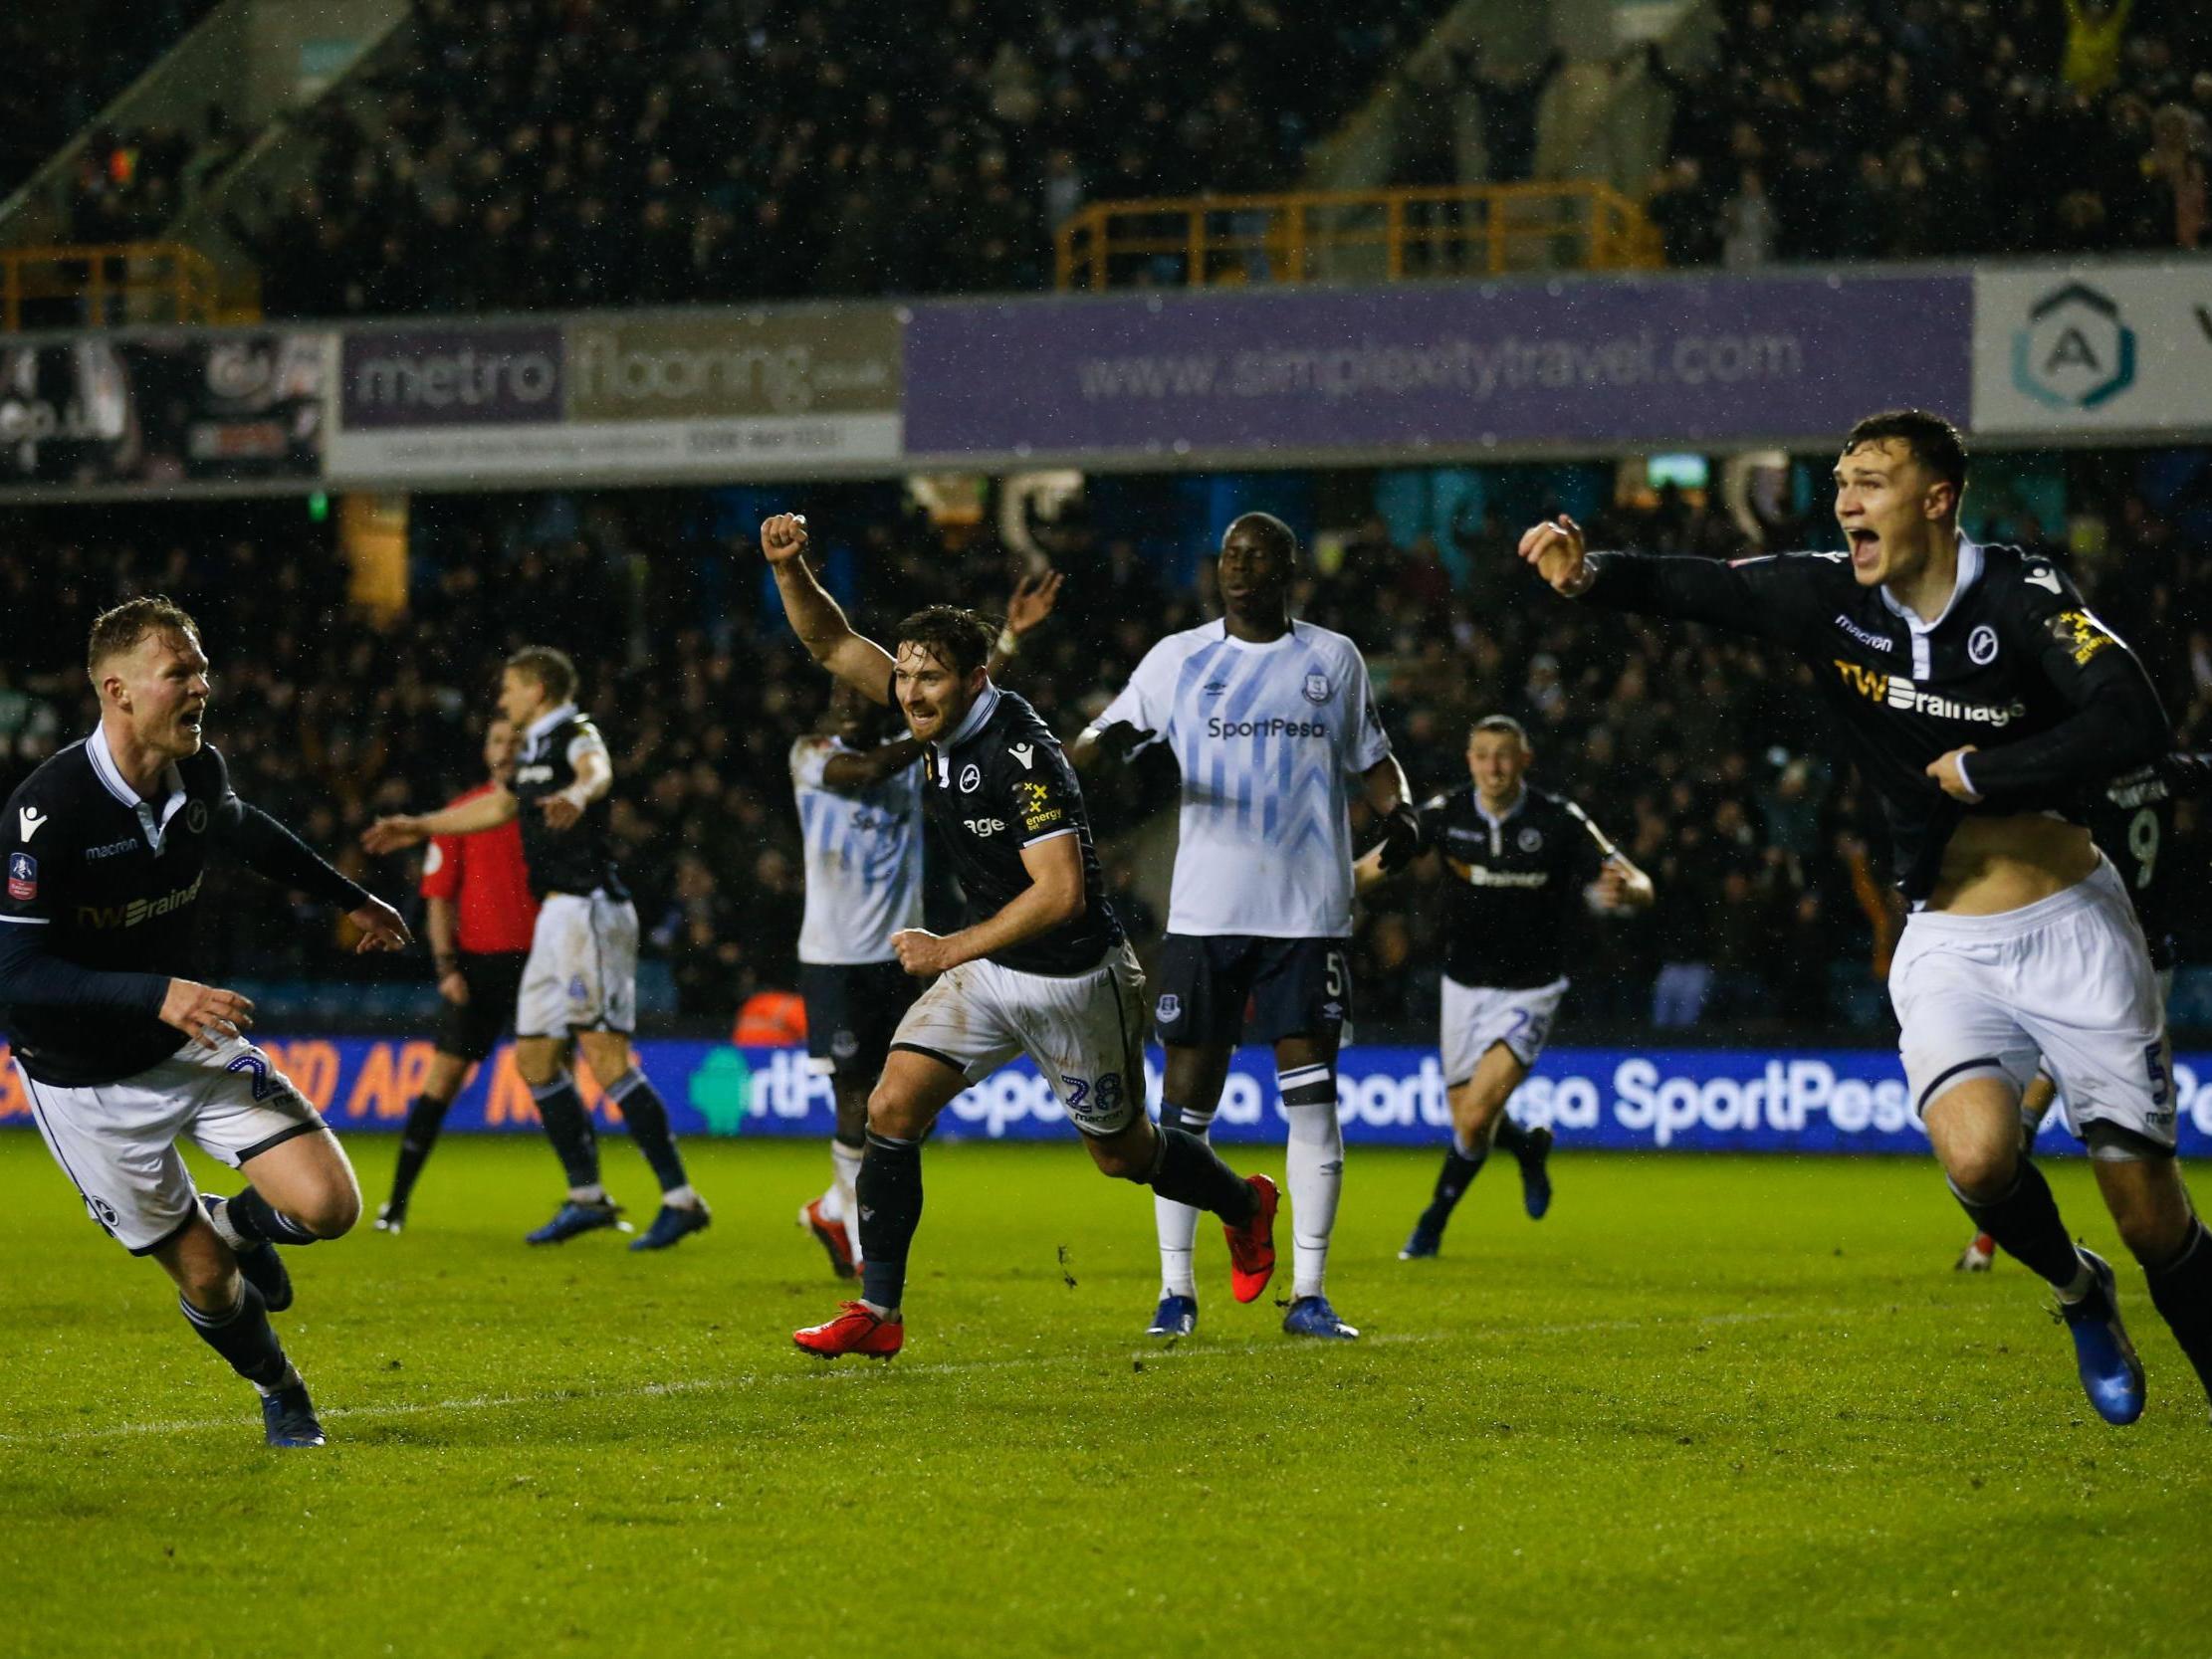 Cooper's goal set Millwall on the way to an FA Cup upset